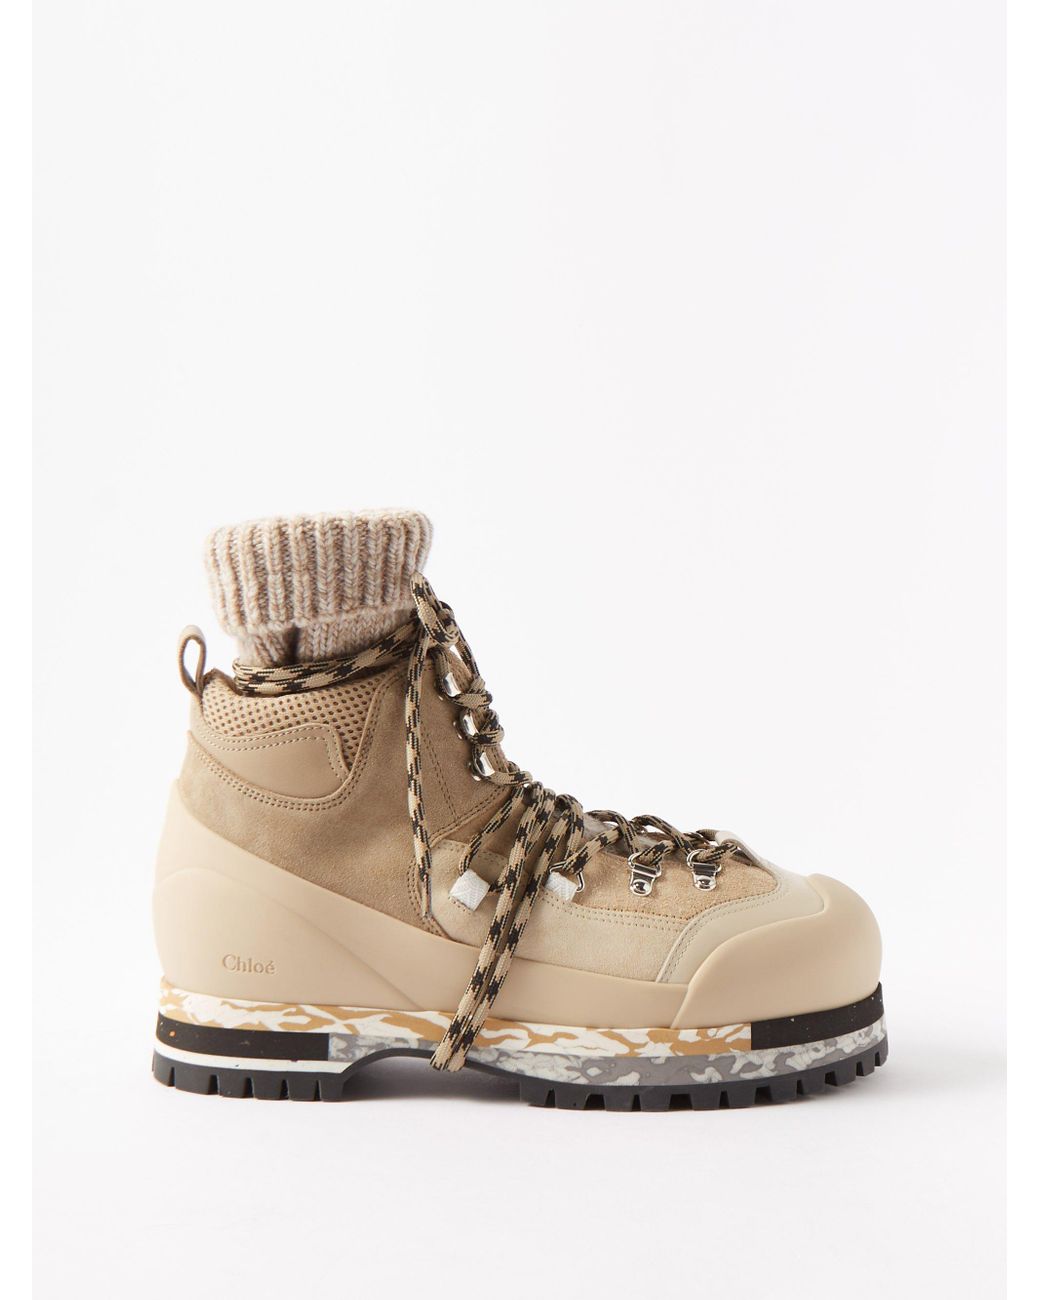 Chloé Nikie Ribbed-cuff Nubuck Boots in Natural | Lyst